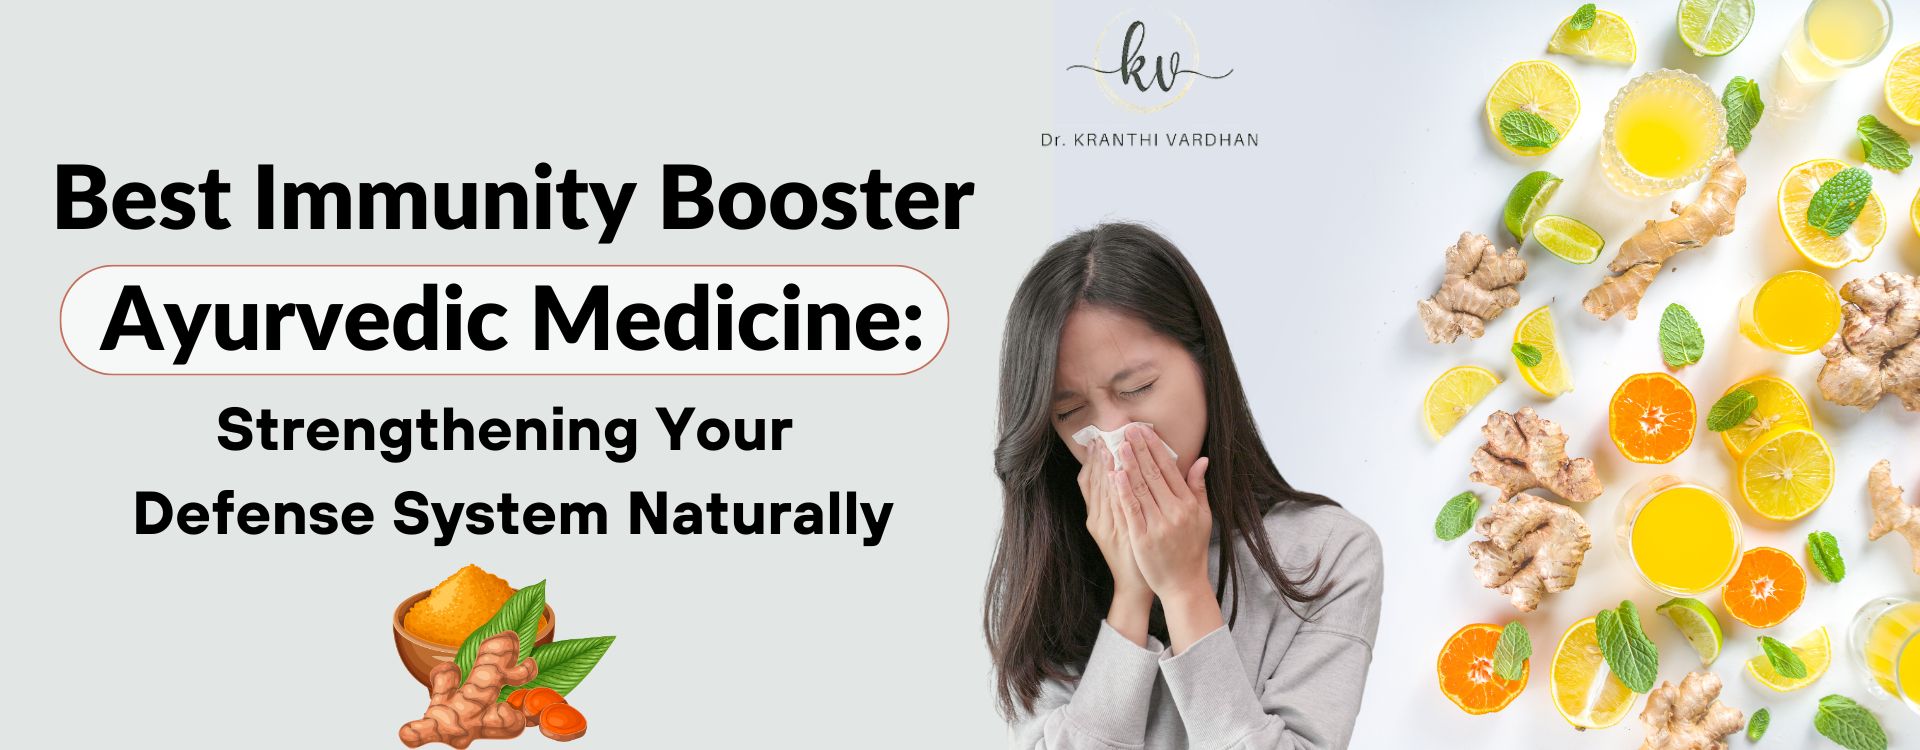 Best Immunity Booster Ayurvedic Medicine: Strengthening Your Defense System Naturally